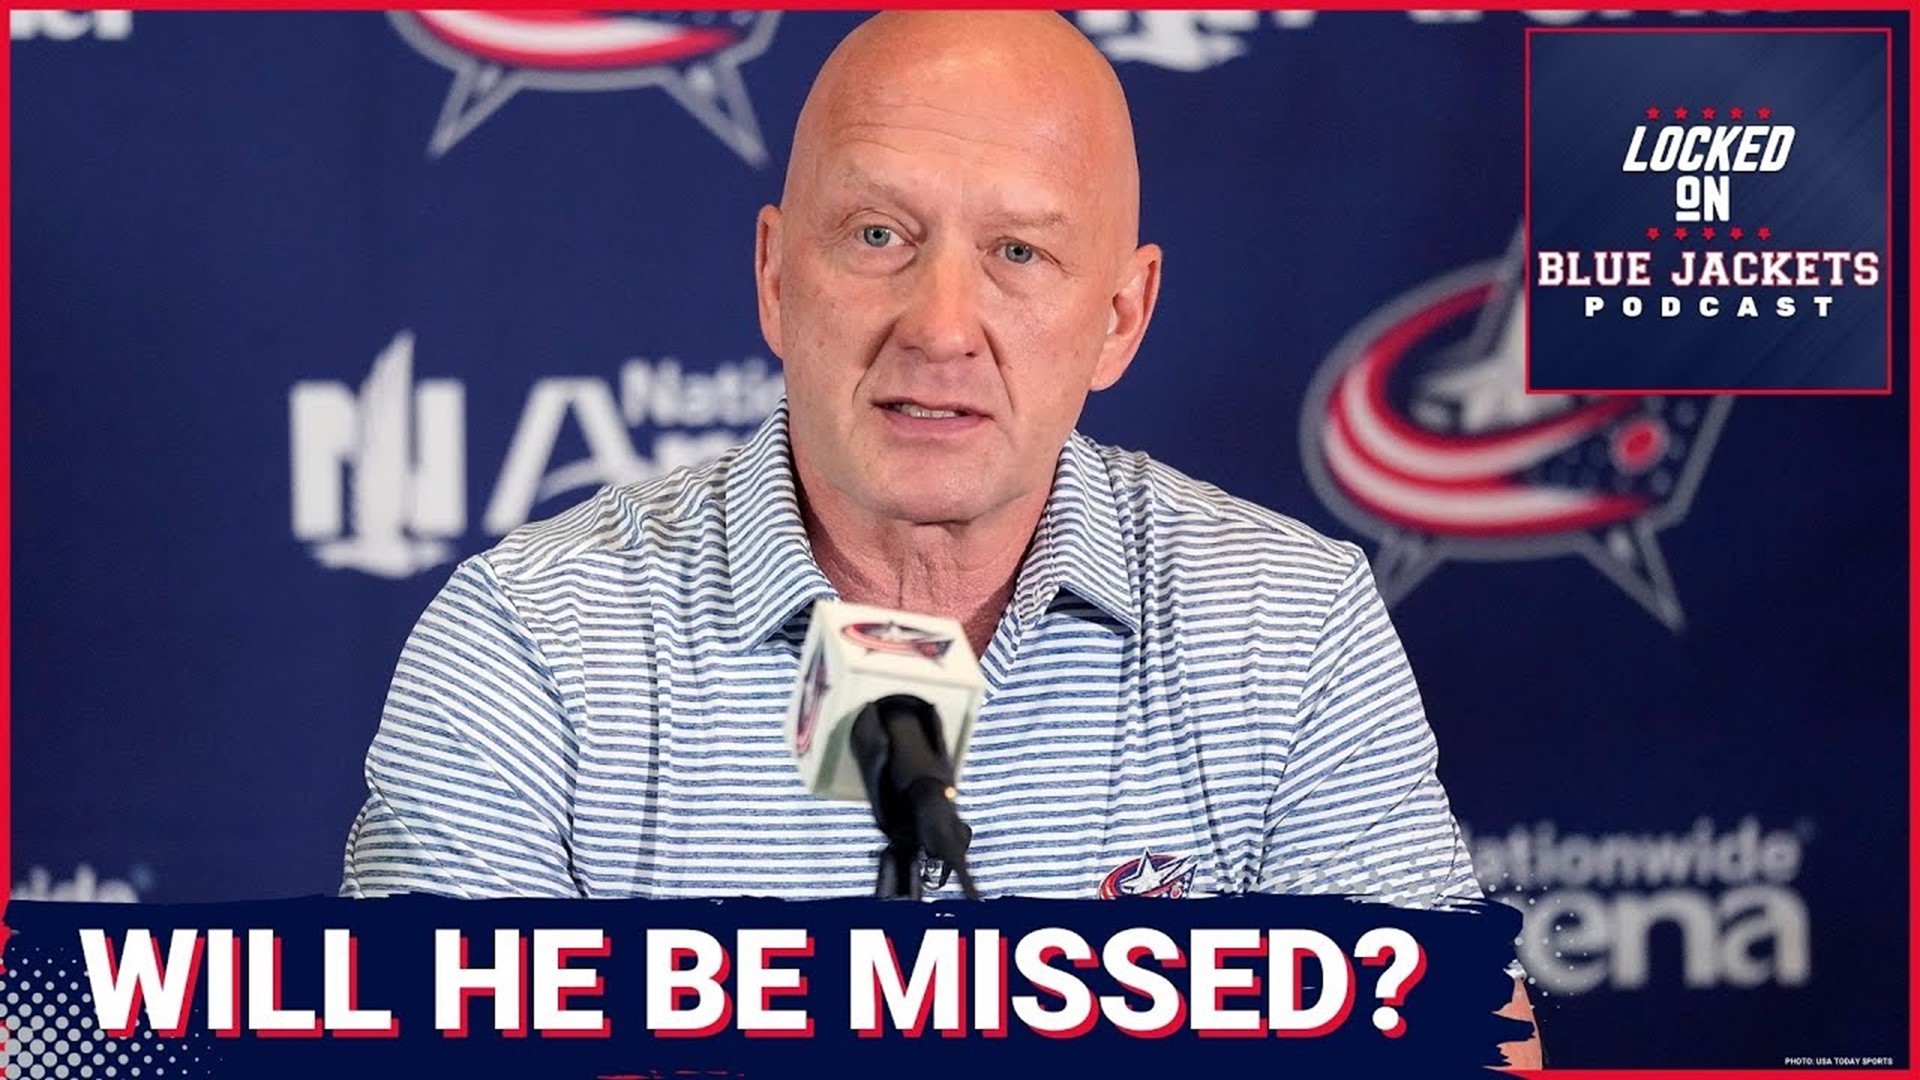 Today we're looking at what Jarmo Kekalainen did for the Blue Jackets over his 11 year tenure. Did he leave the CBJ better than how he found it?